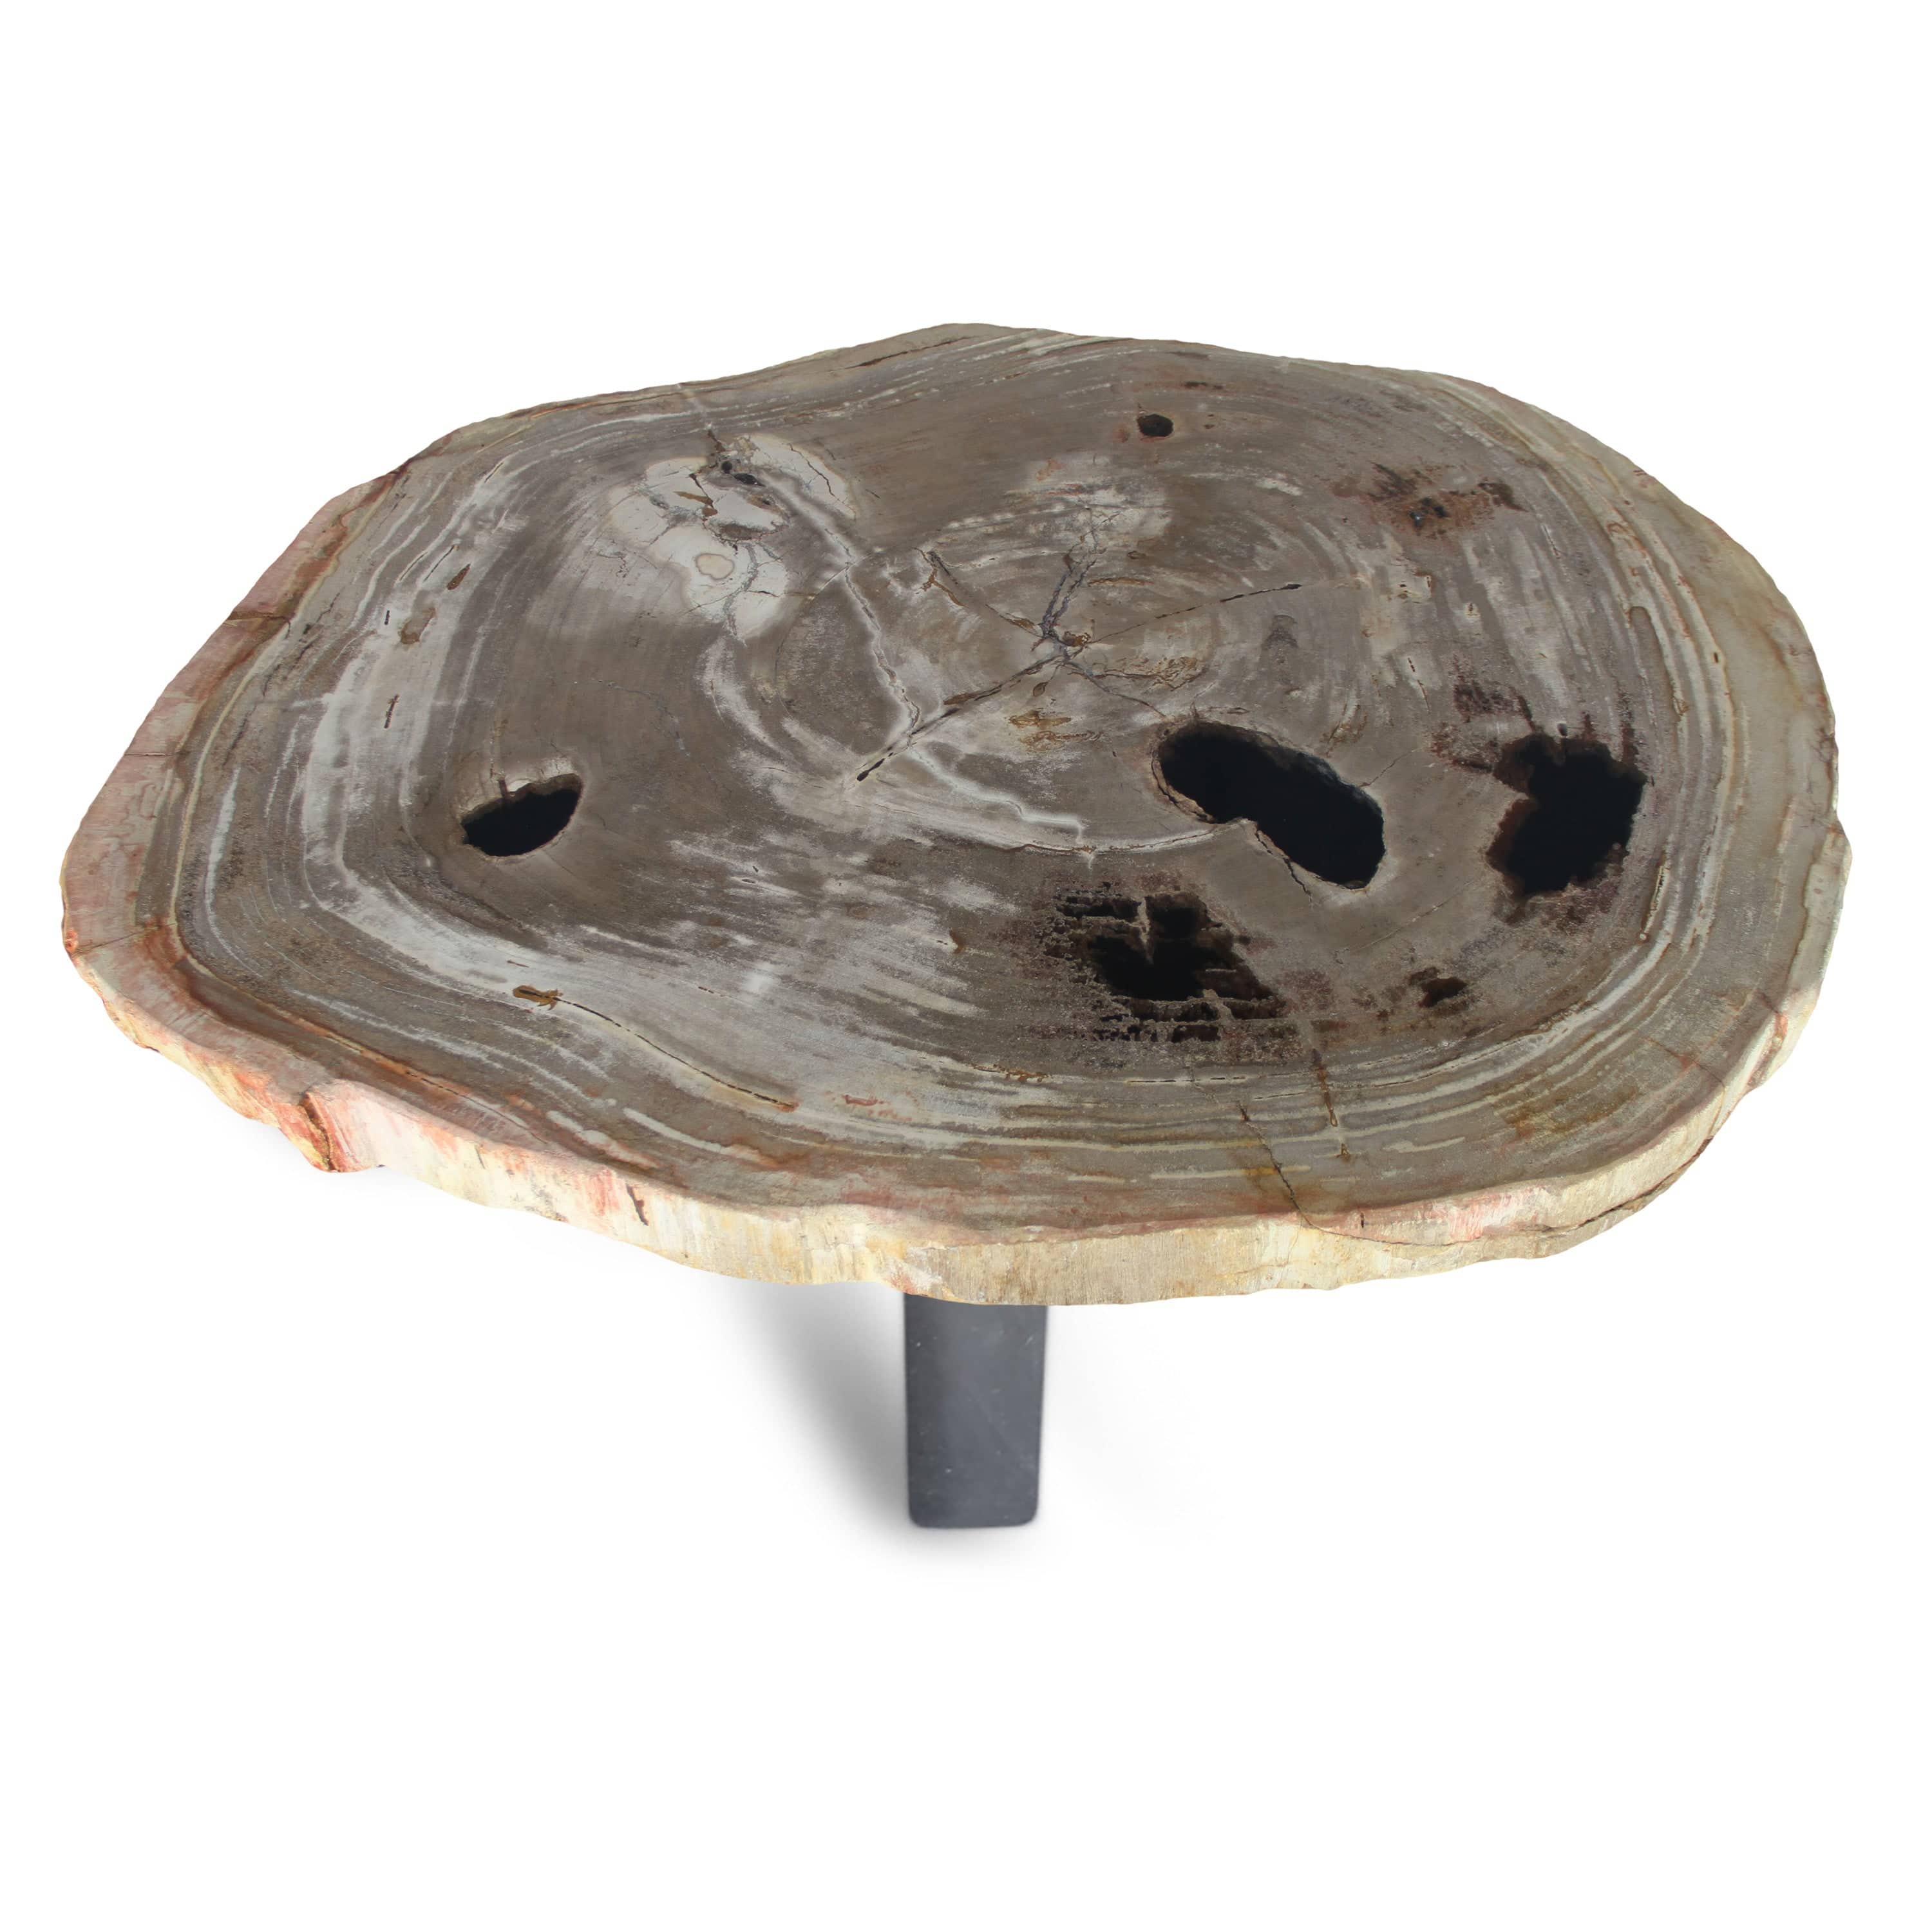 Kalifano Petrified Wood Petrified Wood Round Slab Coffee Table from Indonesia - 37" / 150 lbs PWT5600.004